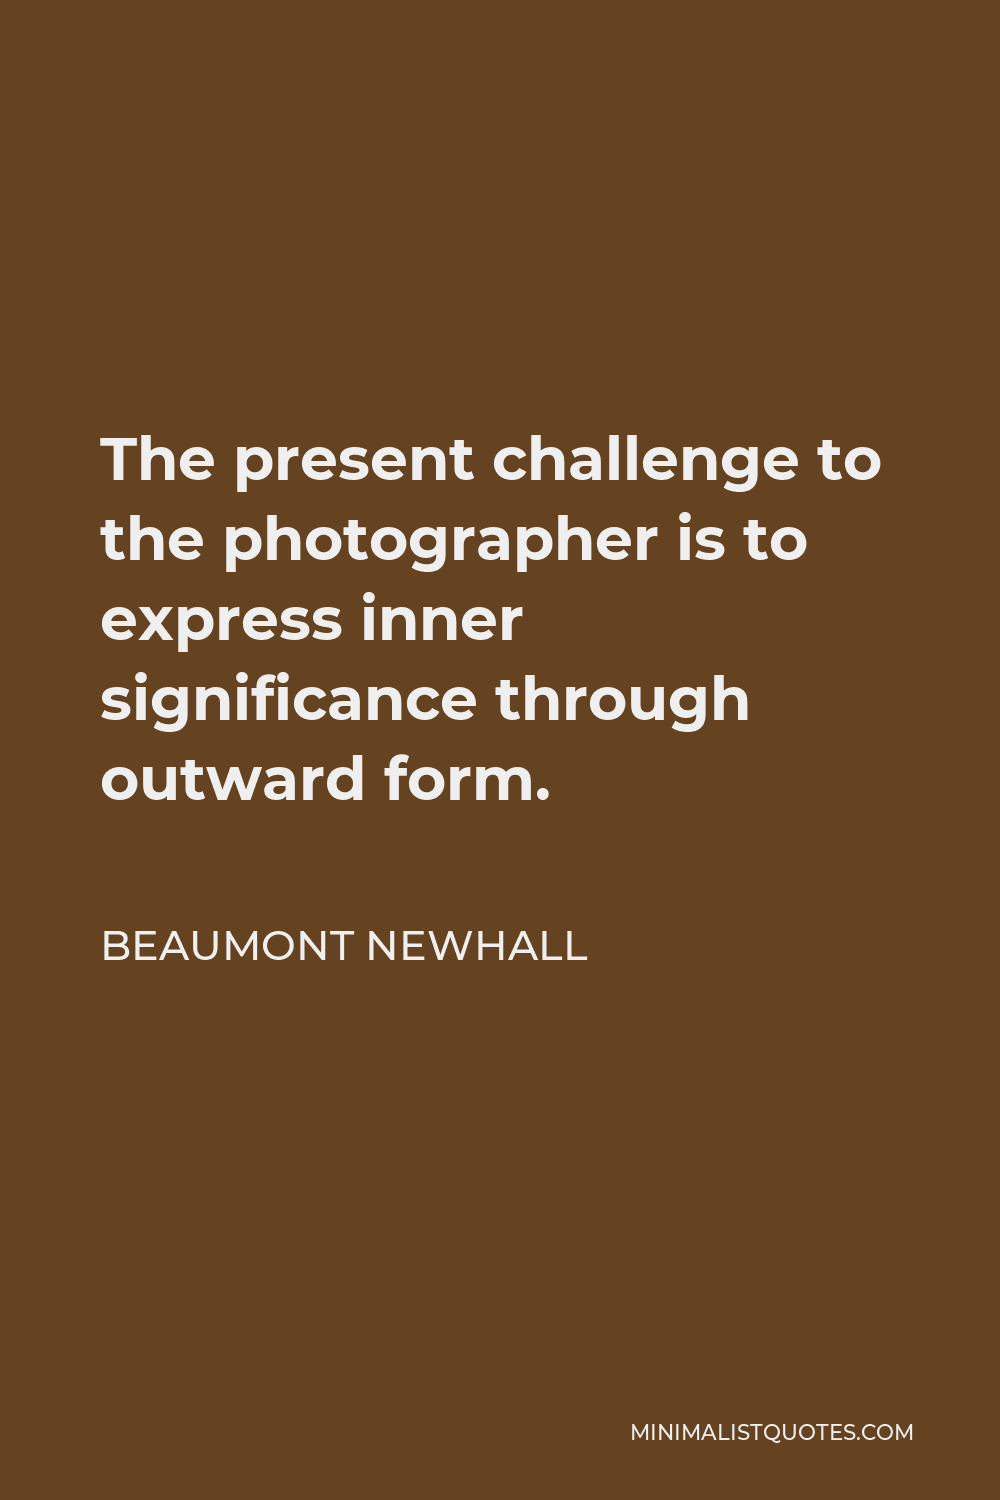 Beaumont Newhall Quote - The present challenge to the photographer is to express inner significance through outward form.